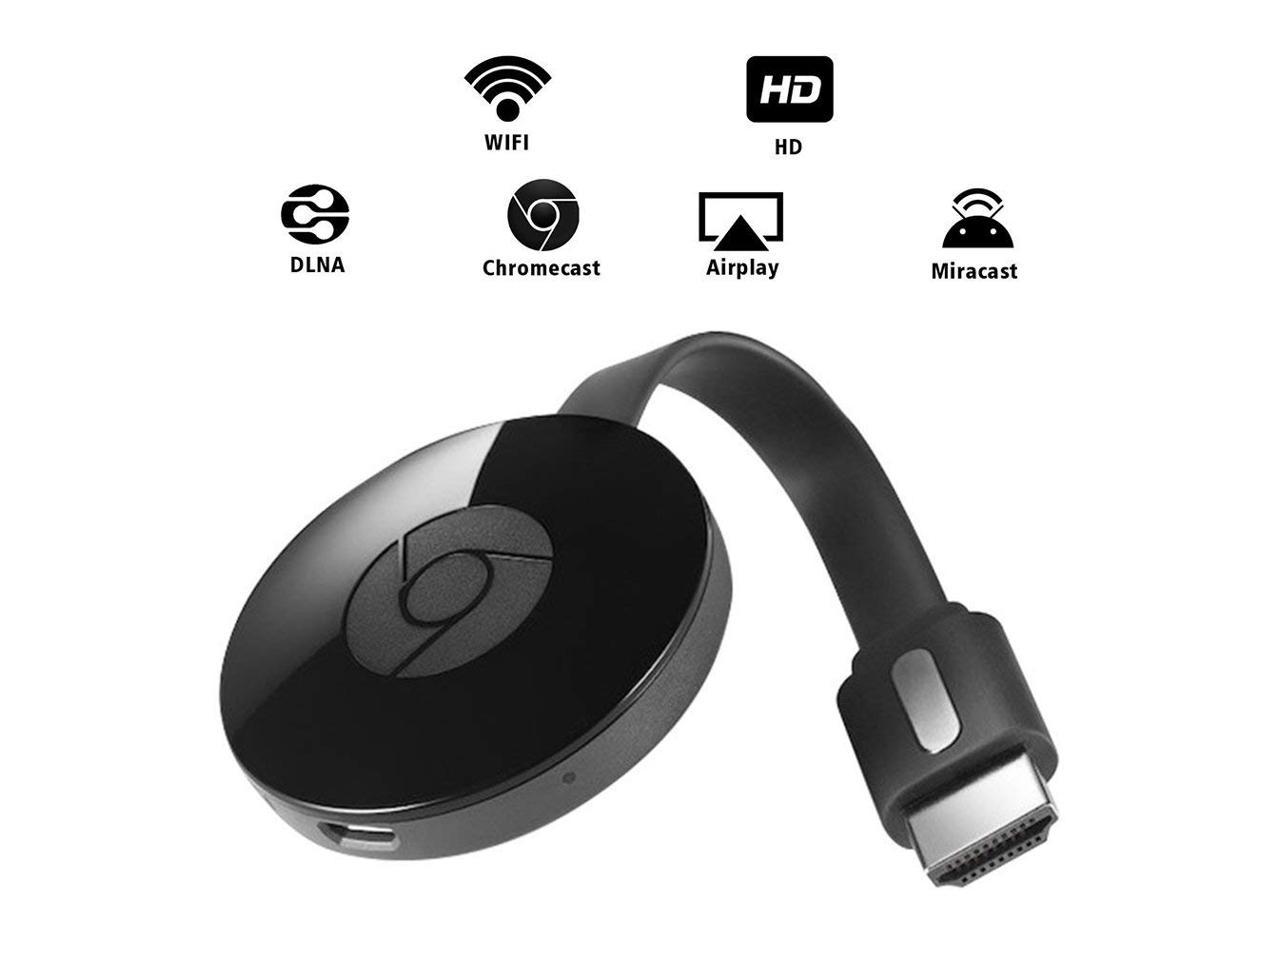 Timoom chromecast Android Wireless Display Dongle 4K 1080P HDMI Portable 5G WiFi TV Reciever Adapter Support Miracast DLNA Airplay for iOS tablet,Mac,Windows